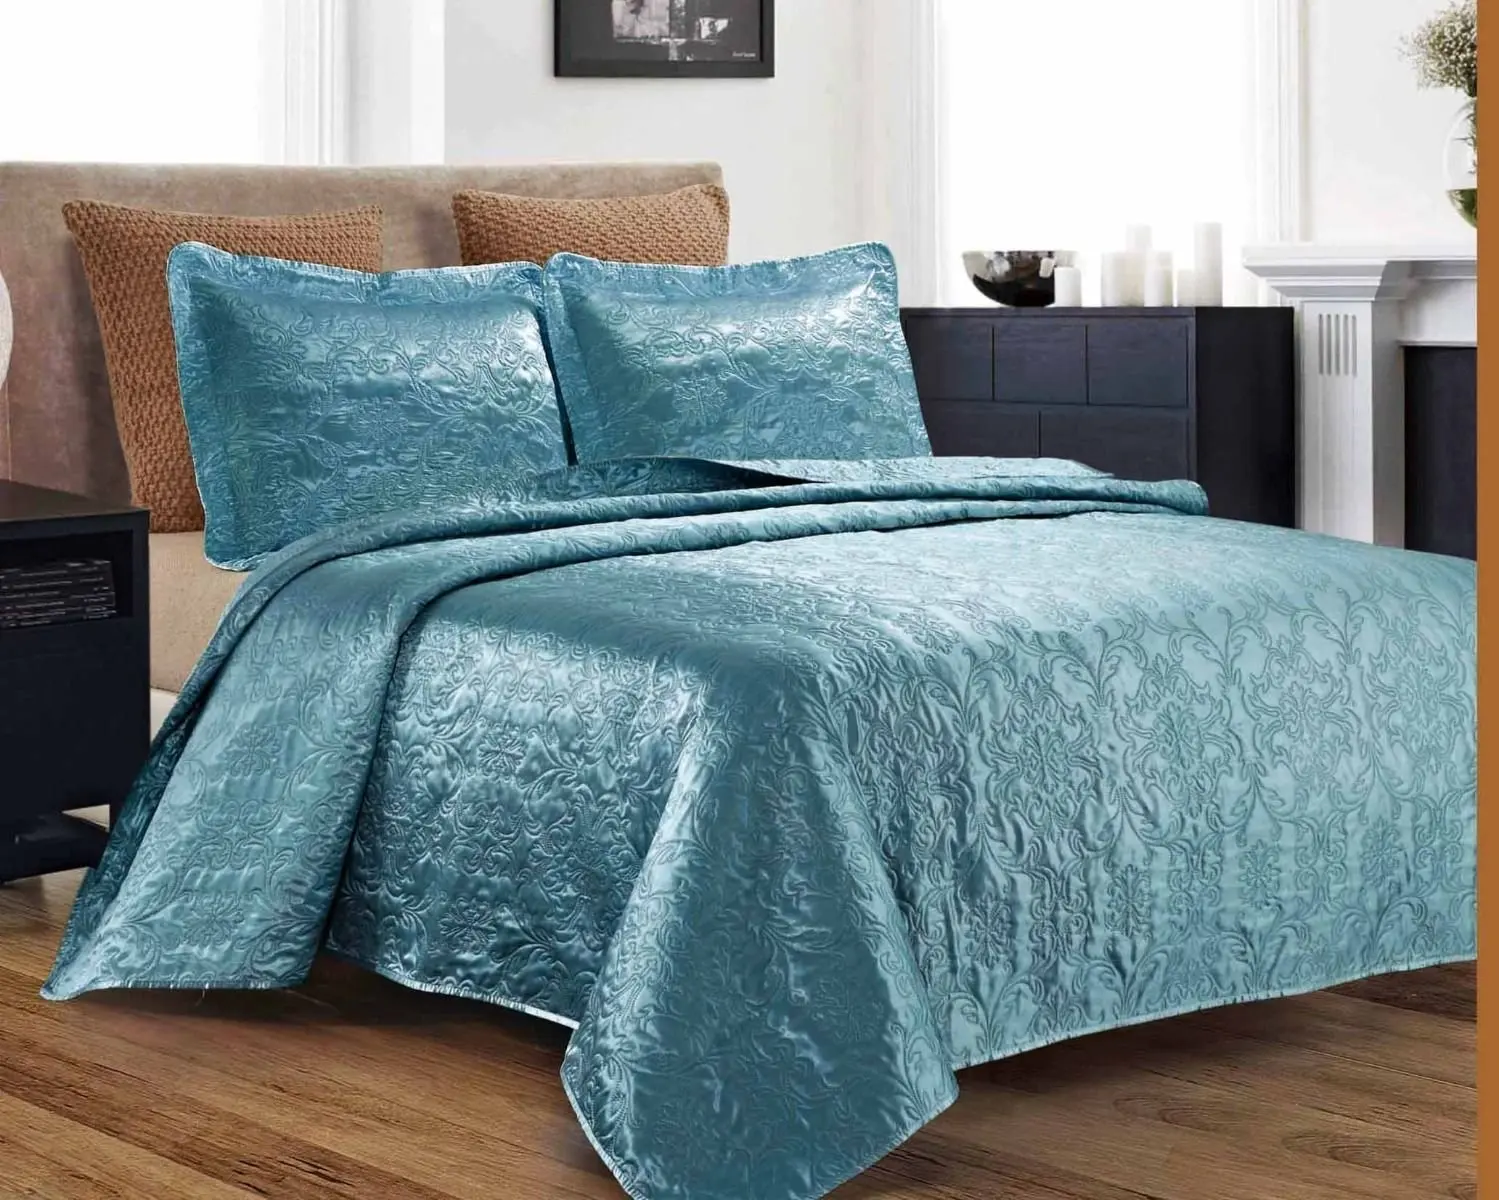 king size turquoise quilt